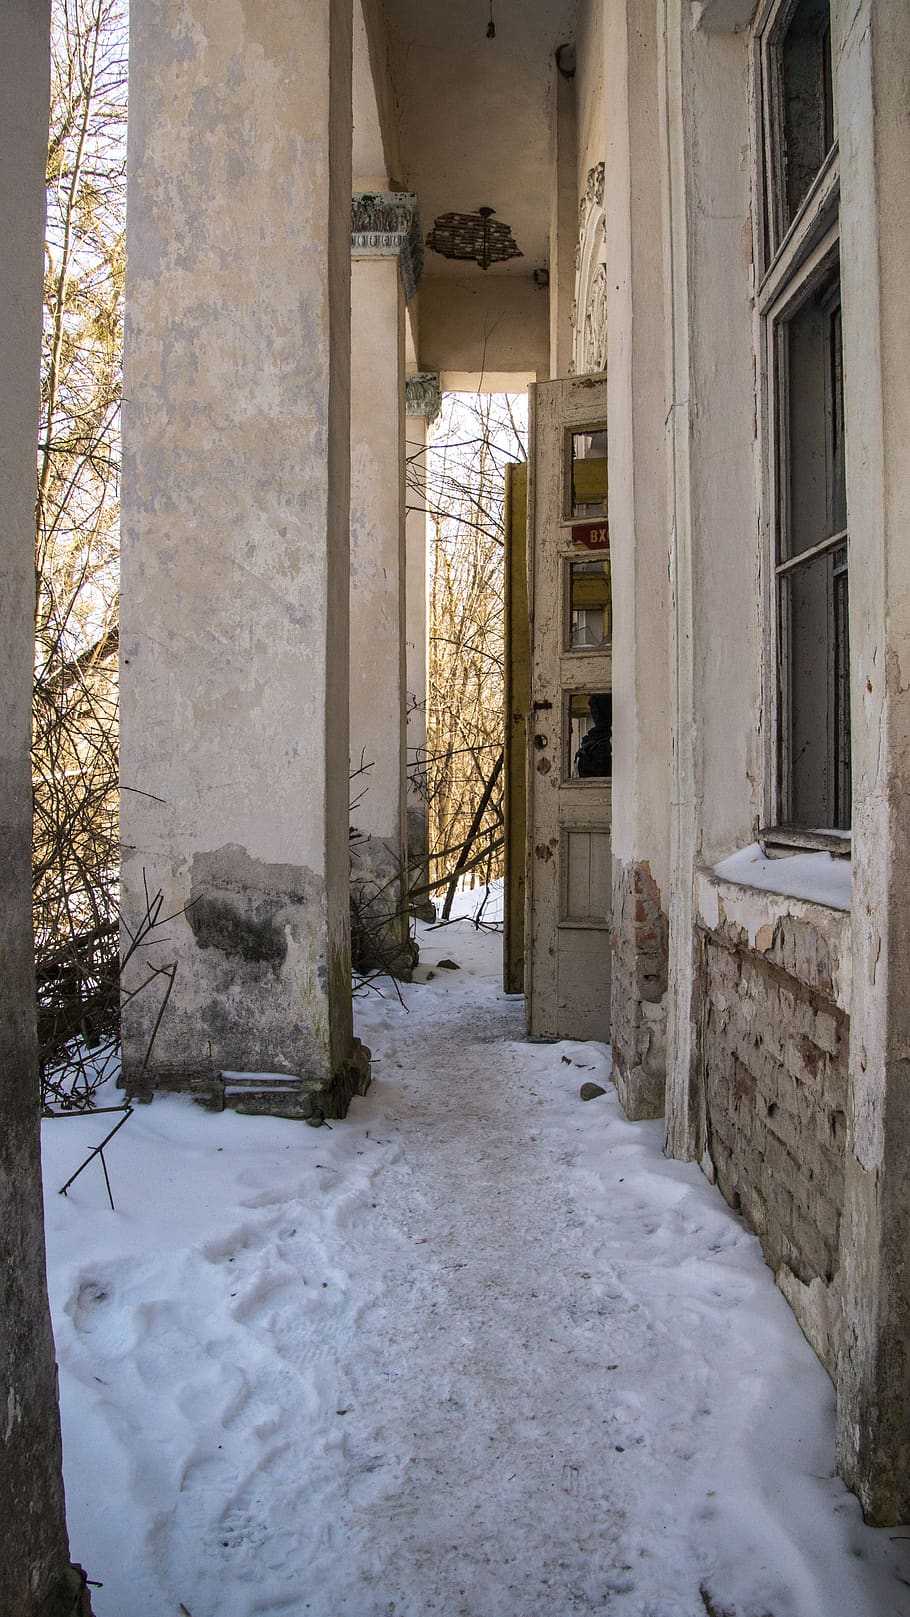 village, snow, culture palace, exclusion zone, winter, white